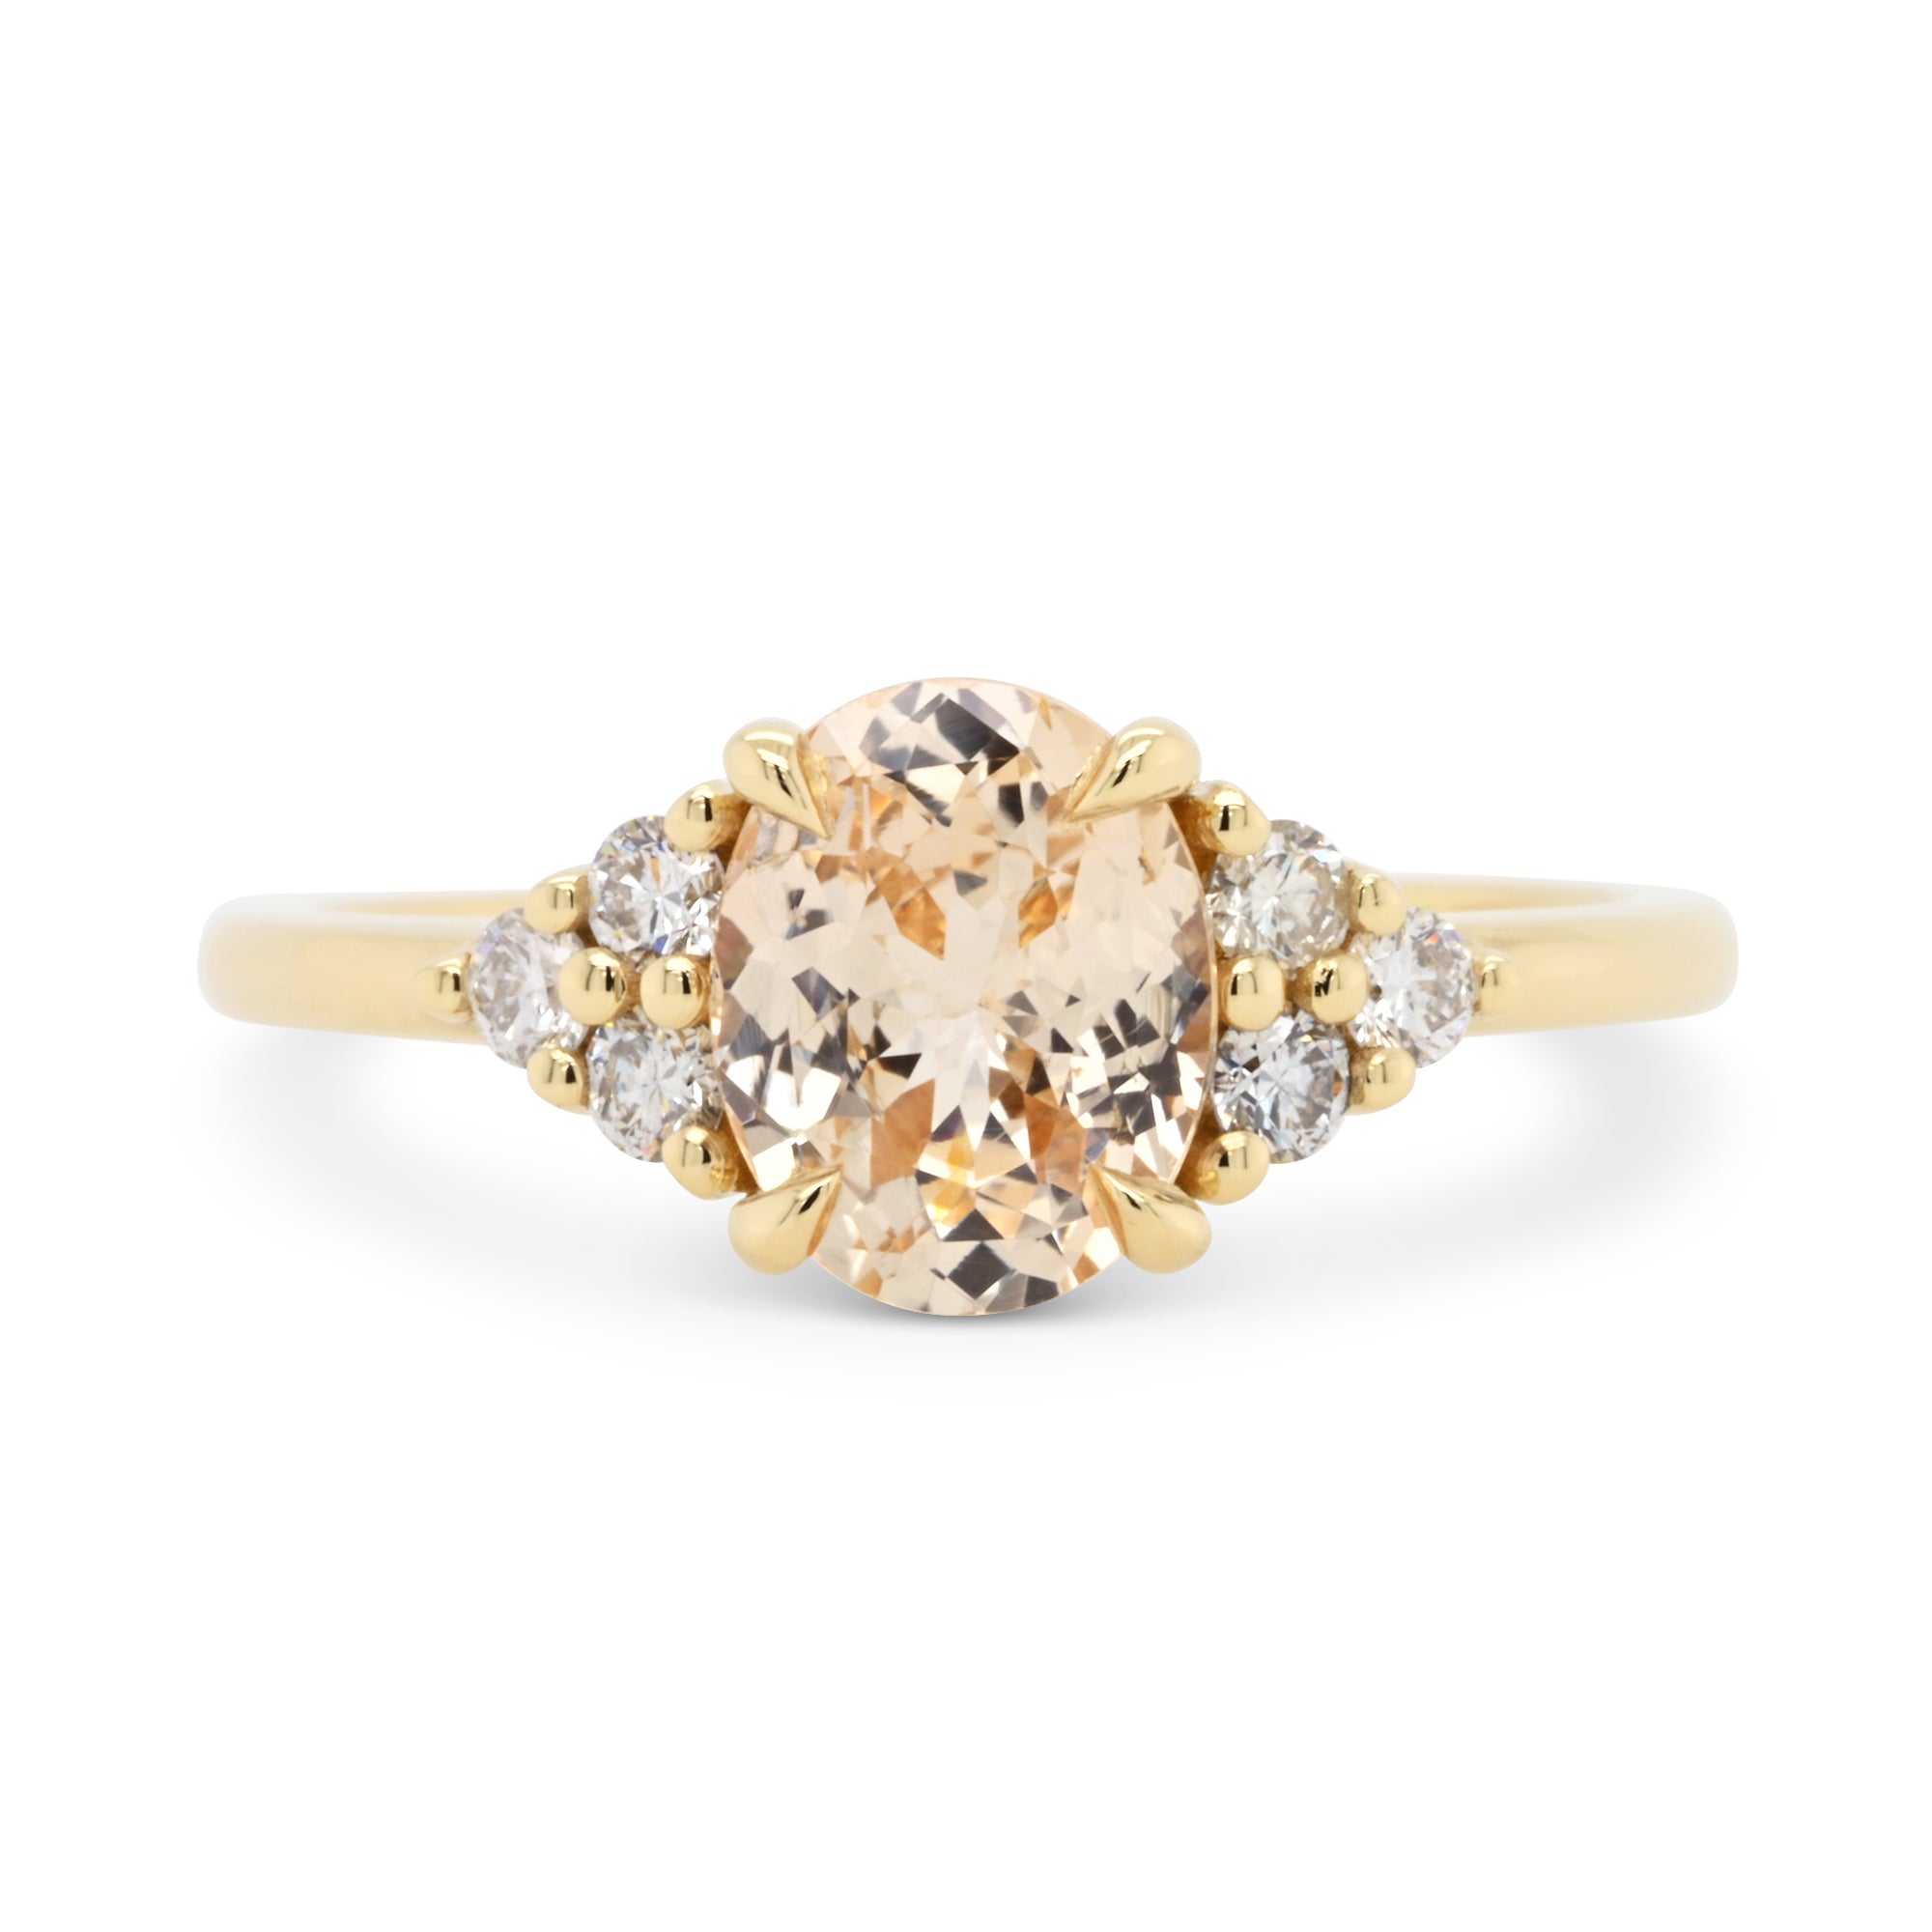 Peach oval sapphire with diamond accents 14k yellow gold engagement ring